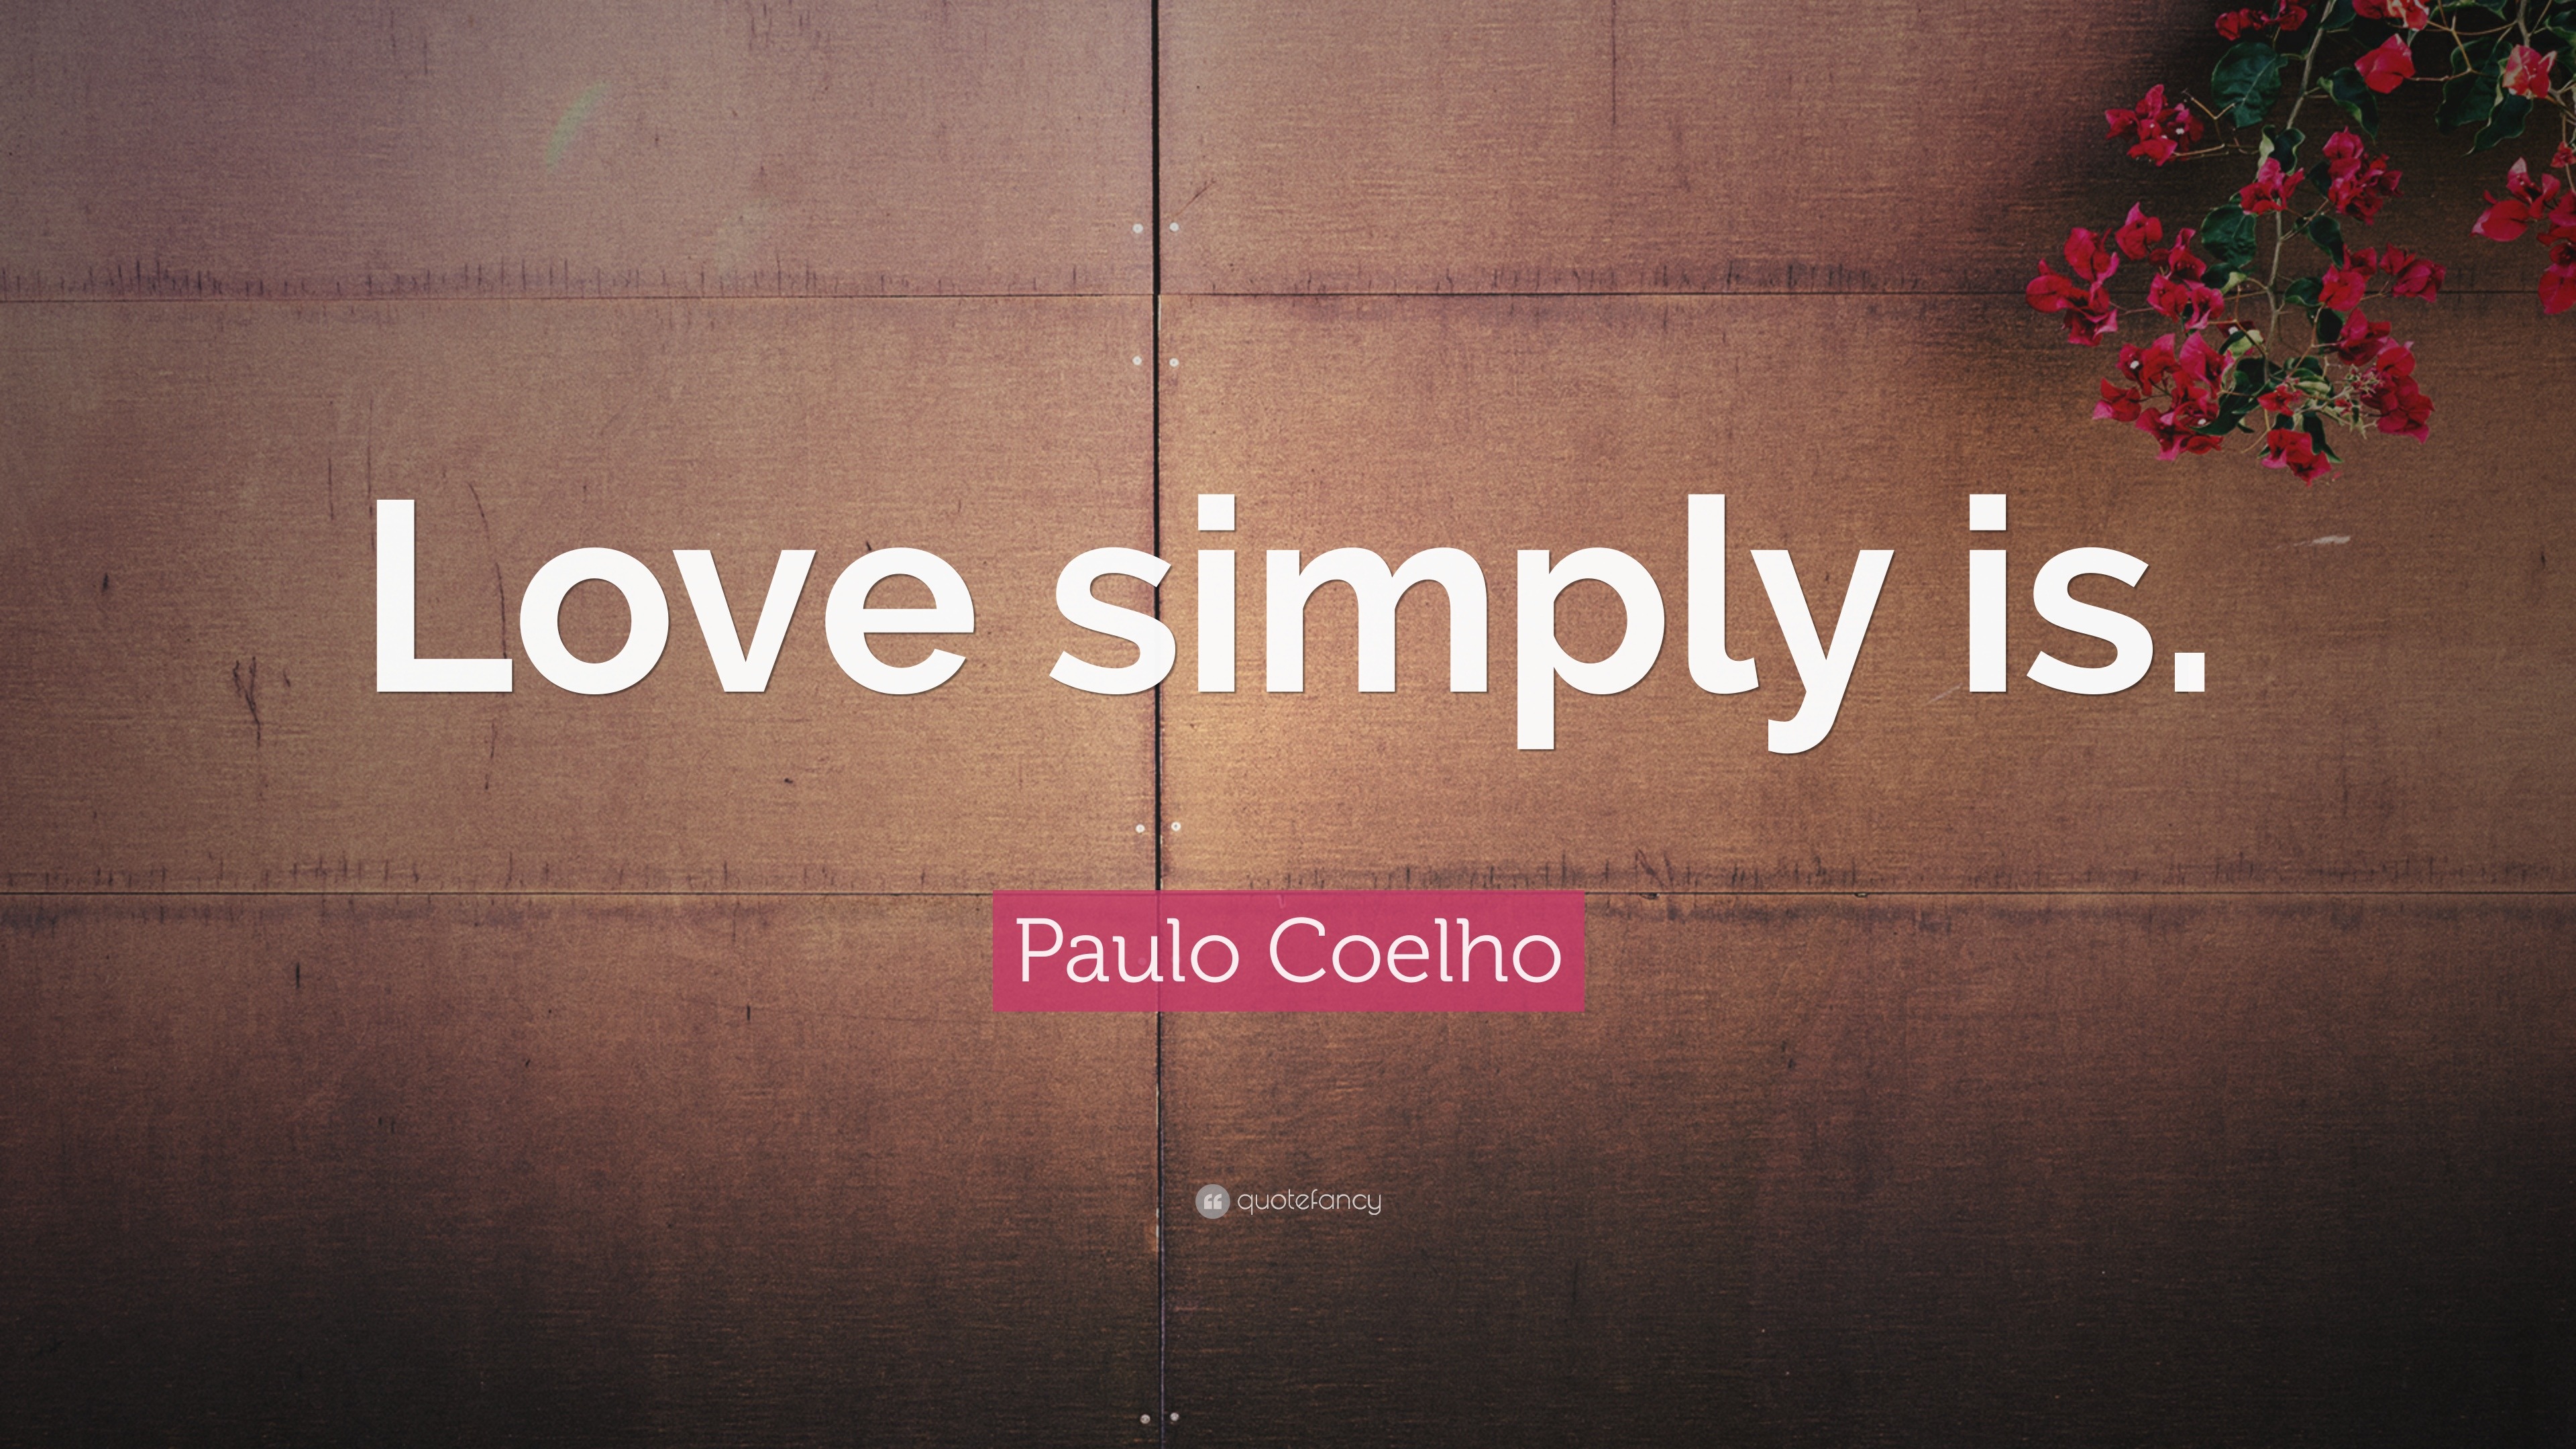 Paulo Coelho Quote: “Love simply is.” (18 wallpapers) - Quotefancy